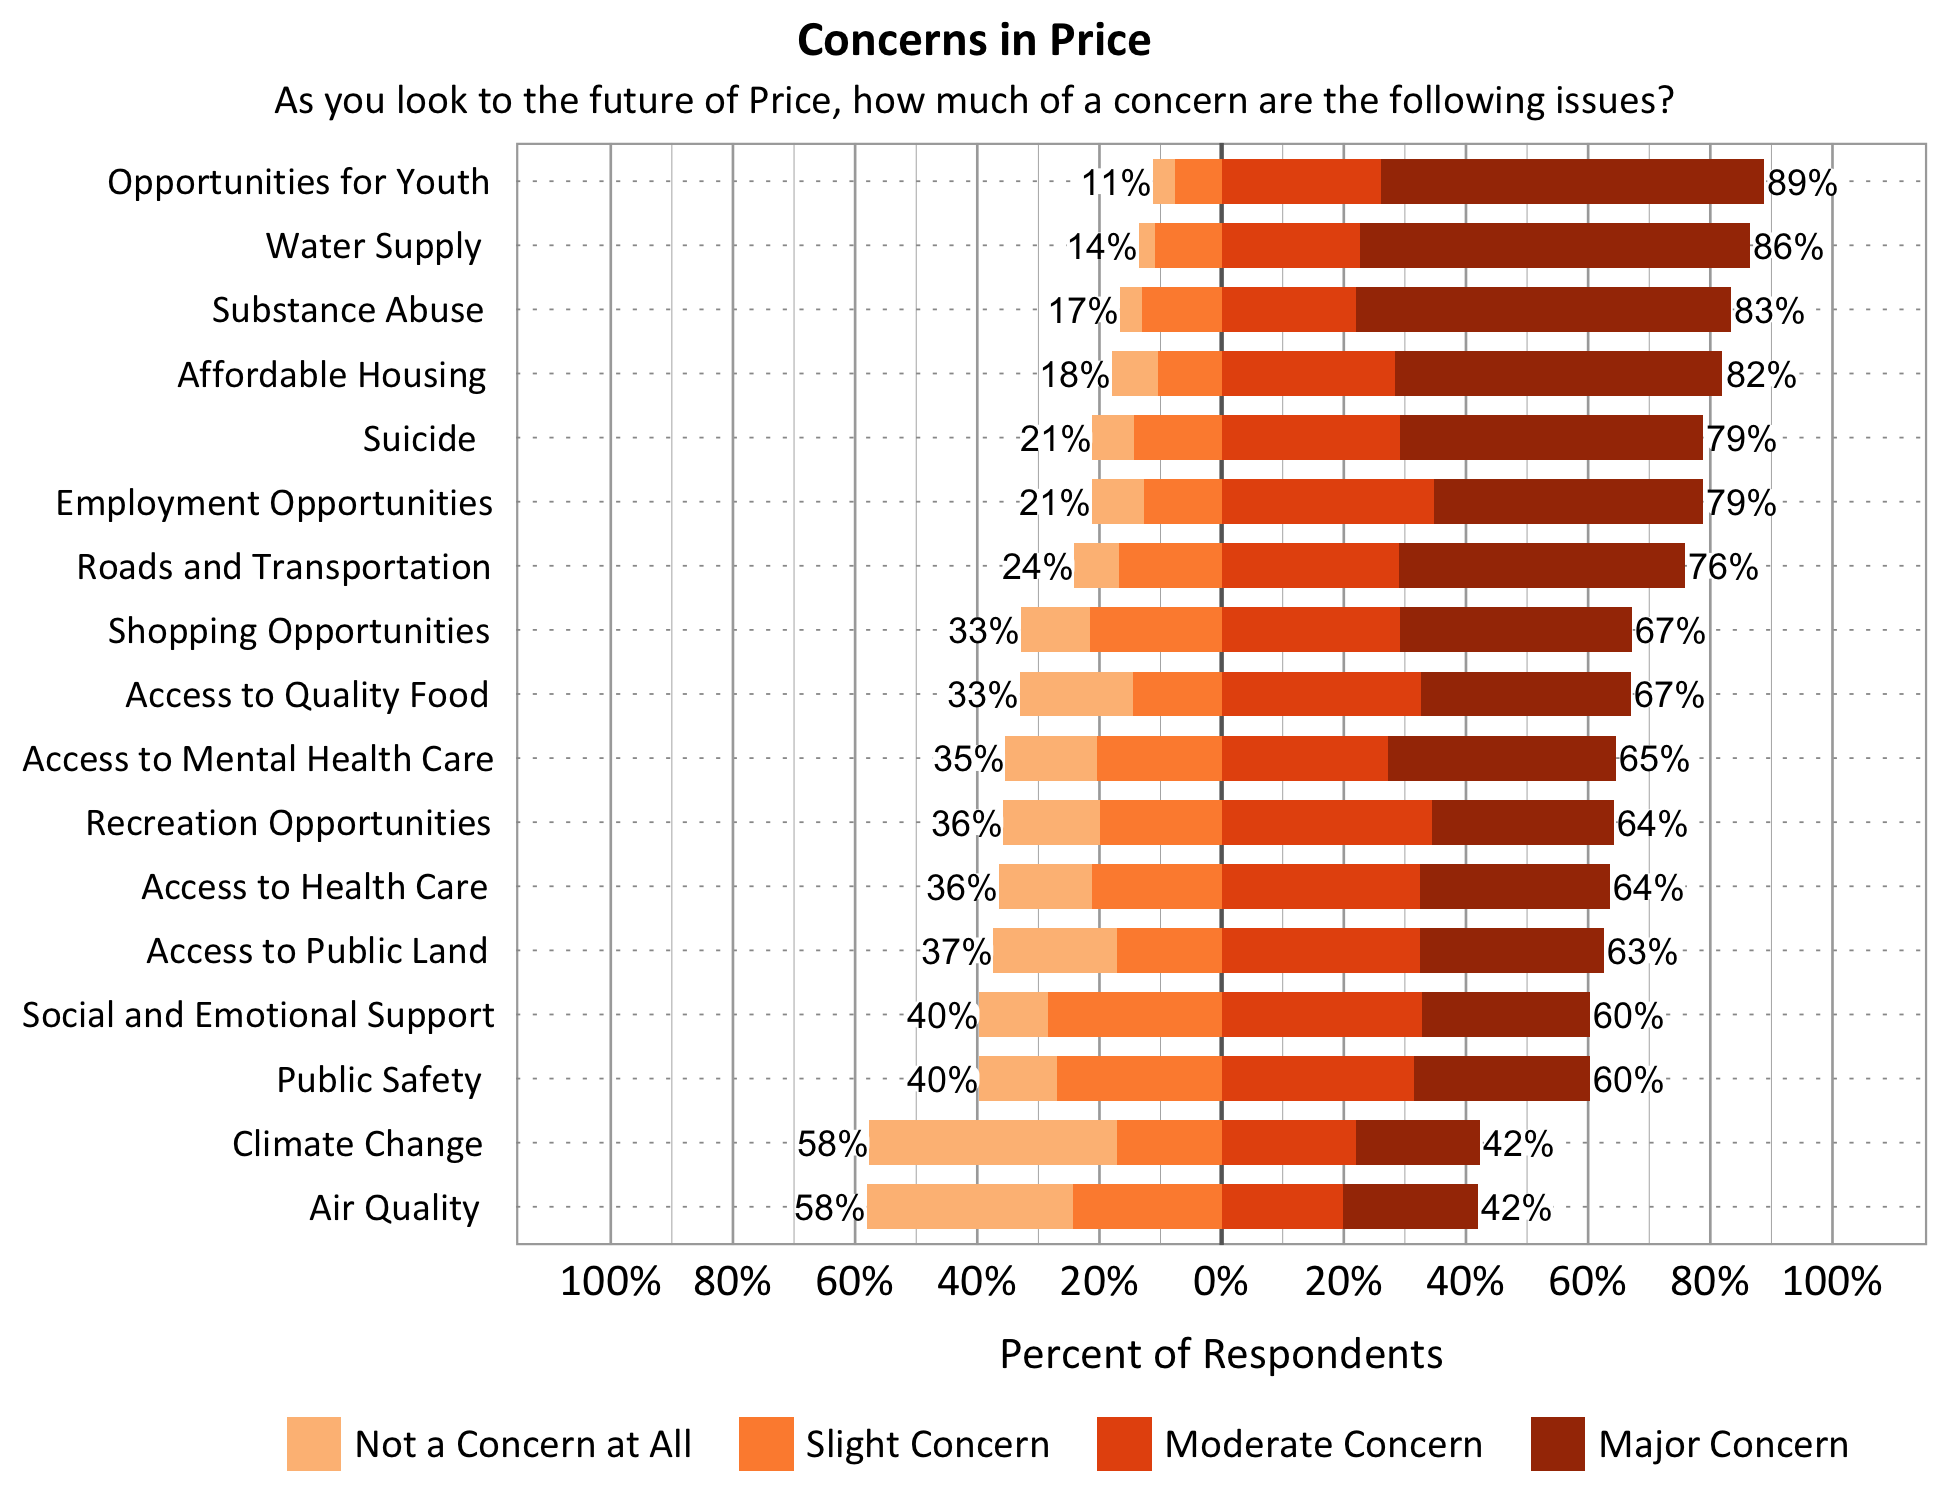 Title: Concerns in Price. Subtitle: As you look to the future of Price, how much of a concern are the following issues? Data – Category: Water Supply- 14% of respondents indicated not a concern at all or slight concern while 86% of respondents indicated a moderate or major concern; Category: Opportunities for Youth- 11% of respondents indicated not a concern at all or slight concern while 89% of respondents indicated a moderate or major concern; Category: Affordable Housing- 18% of respondents indicated not a concern at all or slight concern while 82% of respondents indicated a moderate or major concern; Category: Access to Public Land- 37% of respondents indicated not a concern at all or slight concern while 63% of respondents indicated a moderate or major concern; Category: Employment Opportunities- 21% of respondents indicated not a concern at all or slight concern while 79% of respondents indicated a moderate or major concern; Category: Access to Quality Food- 33% of respondents indicated not a concern at all or slight concern while 67% of respondents indicated a moderate or major concern; Category: Shopping Opportunities- 33% of respondents indicated not a concern at all or slight concern while 67% of respondents indicated a moderate or major concern; Category: Recreation Opportunities- 36% of respondents indicated not a concern at all or slight concern while 64% of respondents indicated a moderate or major concern; Category: Substance Abuse- 17% of respondents indicated not a concern at all or slight concern while 83% of respondents indicated a moderate or major concern; Category: Roads and Transportation- 24% of respondents indicated not a concern at all or slight concern while 76% of respondents indicated a moderate or major concern; Category: Social and Emotional Support- 40% of respondents indicated not a concern at all or slight concern while 60% of respondents indicated a moderate or major concern; Category: Access to Health Care- 36% of respondents indicated not a concern at all or slight concern while 64% of respondents indicated a moderate or major concern; Category: Public Safety- 40% of respondents indicated not a concern at all or slight concern while 60% of respondents indicated a moderate or major concern; Category: Access to Mental Health Care - 35% of respondents indicated not a concern at all or slight concern while 65% of respondents indicated a moderate or major concern; Category: Air Quality- 58% of respondents indicated not a concern at all or slight concern while 42% of respondents indicated a moderate or major concern. Climate Change- 58% of respondents indicated not a concern at all or slight concern while 42% of respondents indicated a moderate or major concern.